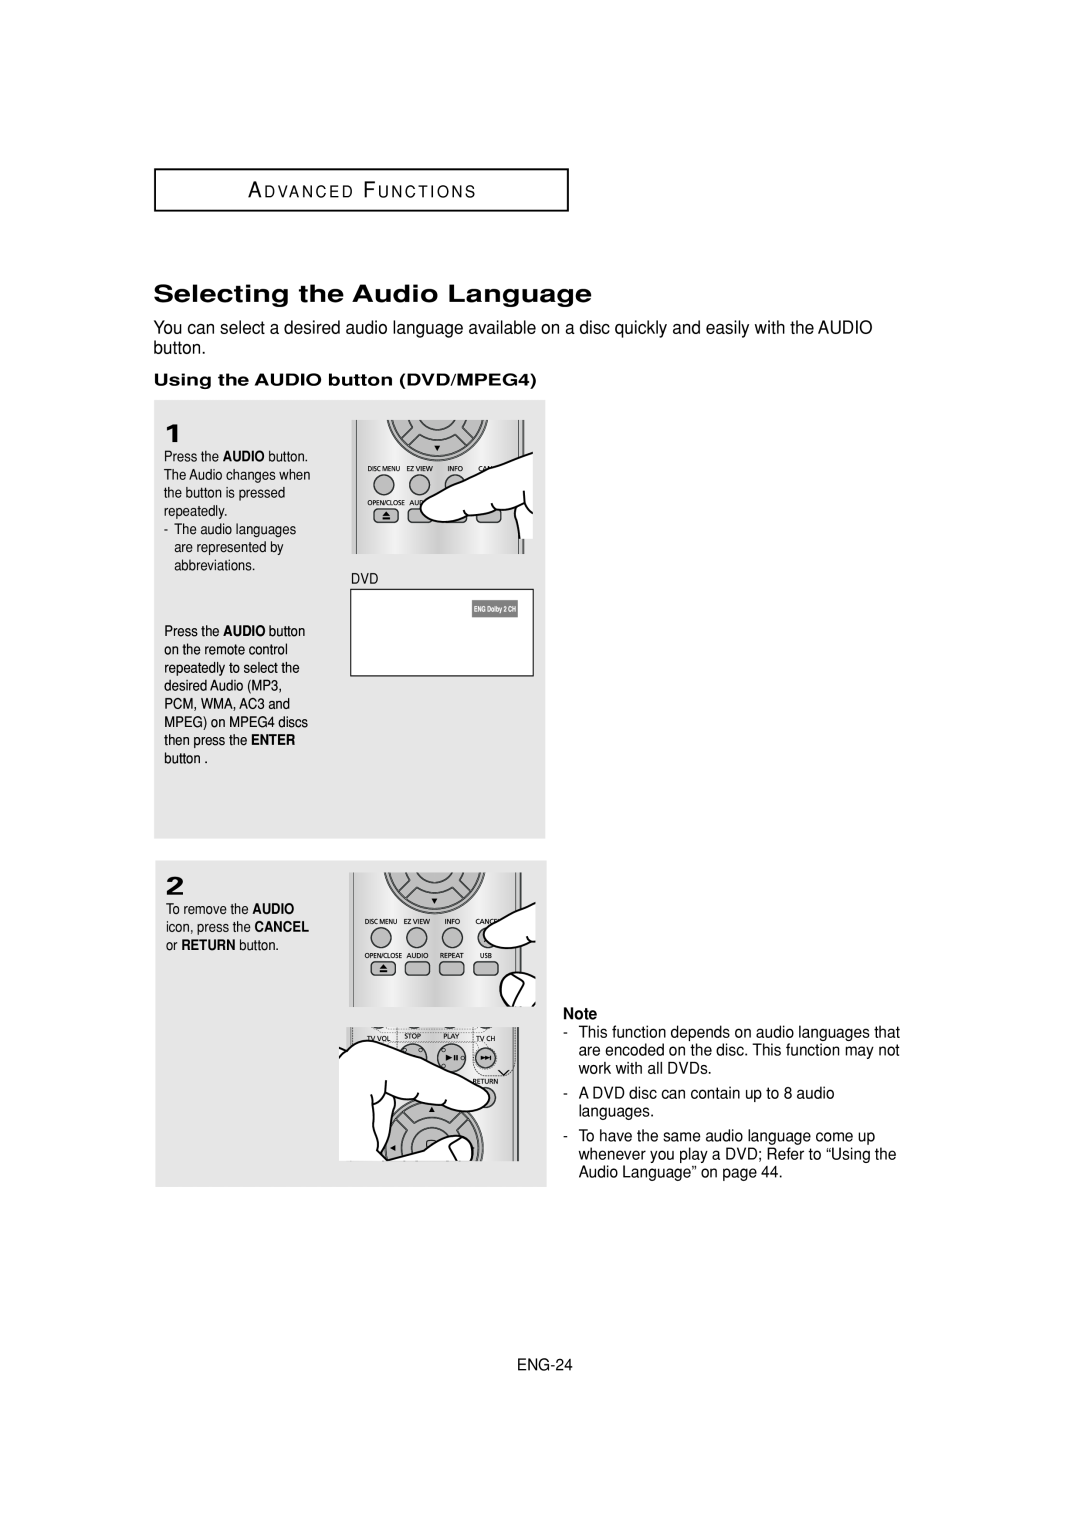 Samsung DVD-P181 manual Selecting the Audio Language, Using the AUDIO button DVD/MPEG4 